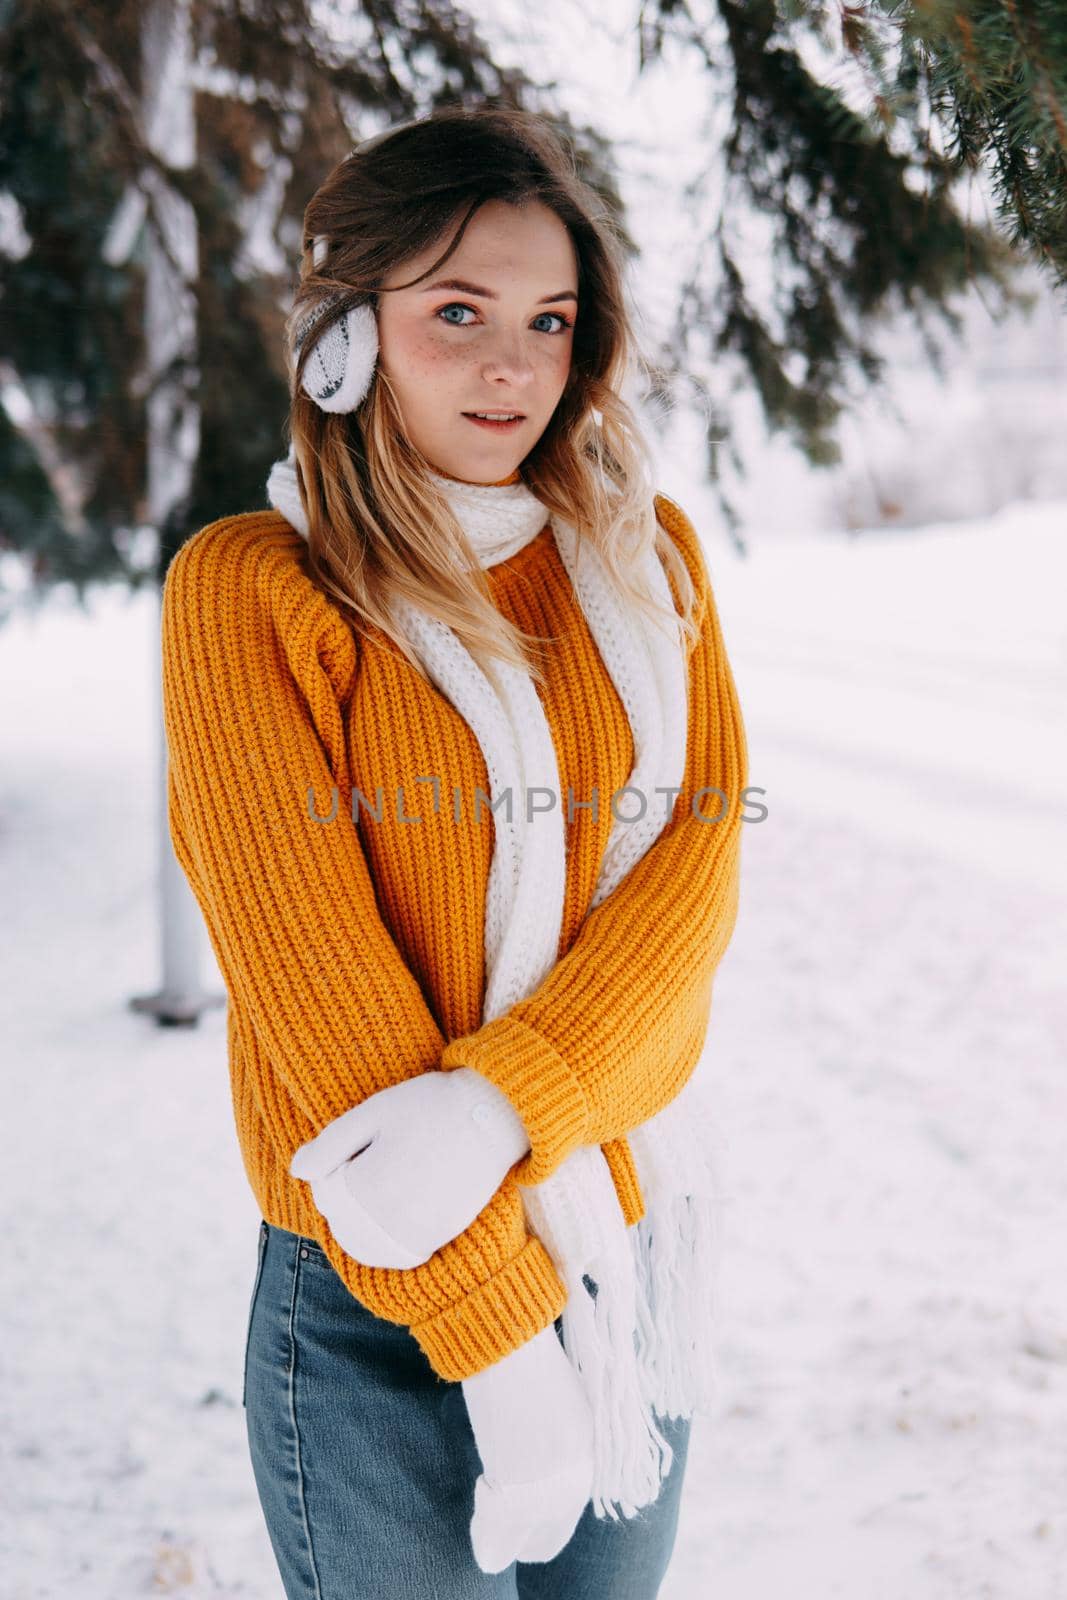 Teen blonde in a yellow sweater outside in winter. A teenage girl on a walk in winter clothes in a snowy forest by Annu1tochka